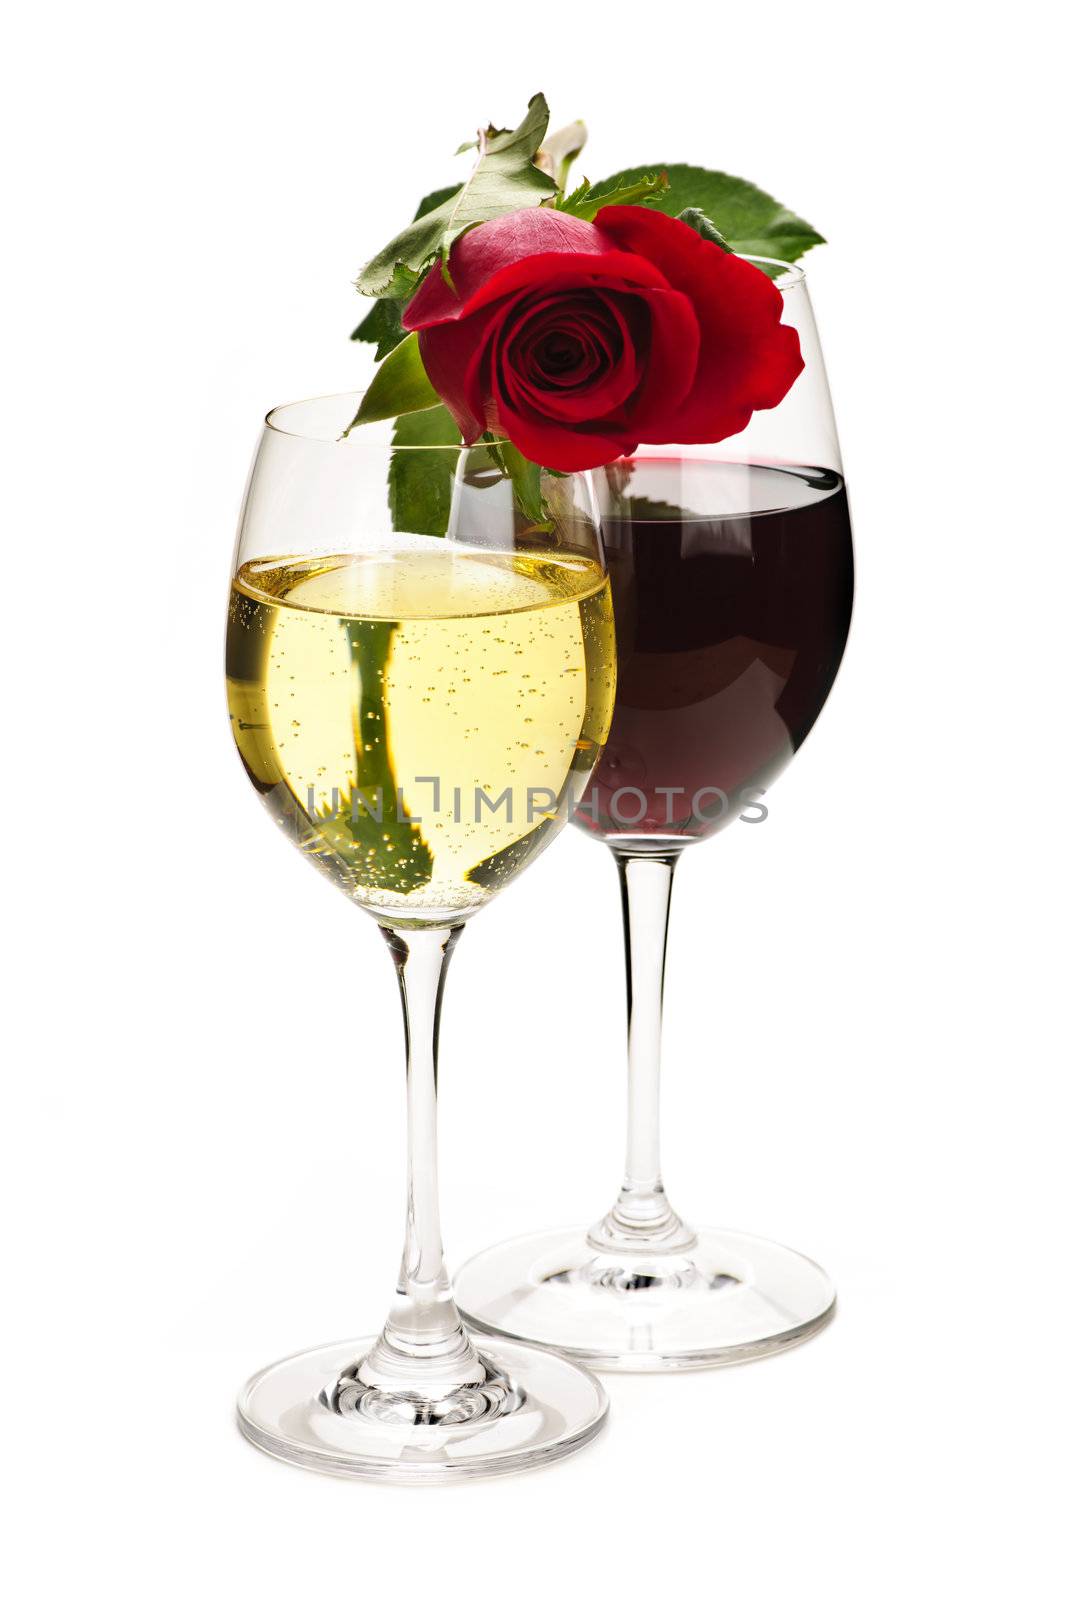 Wine with red rose by elenathewise